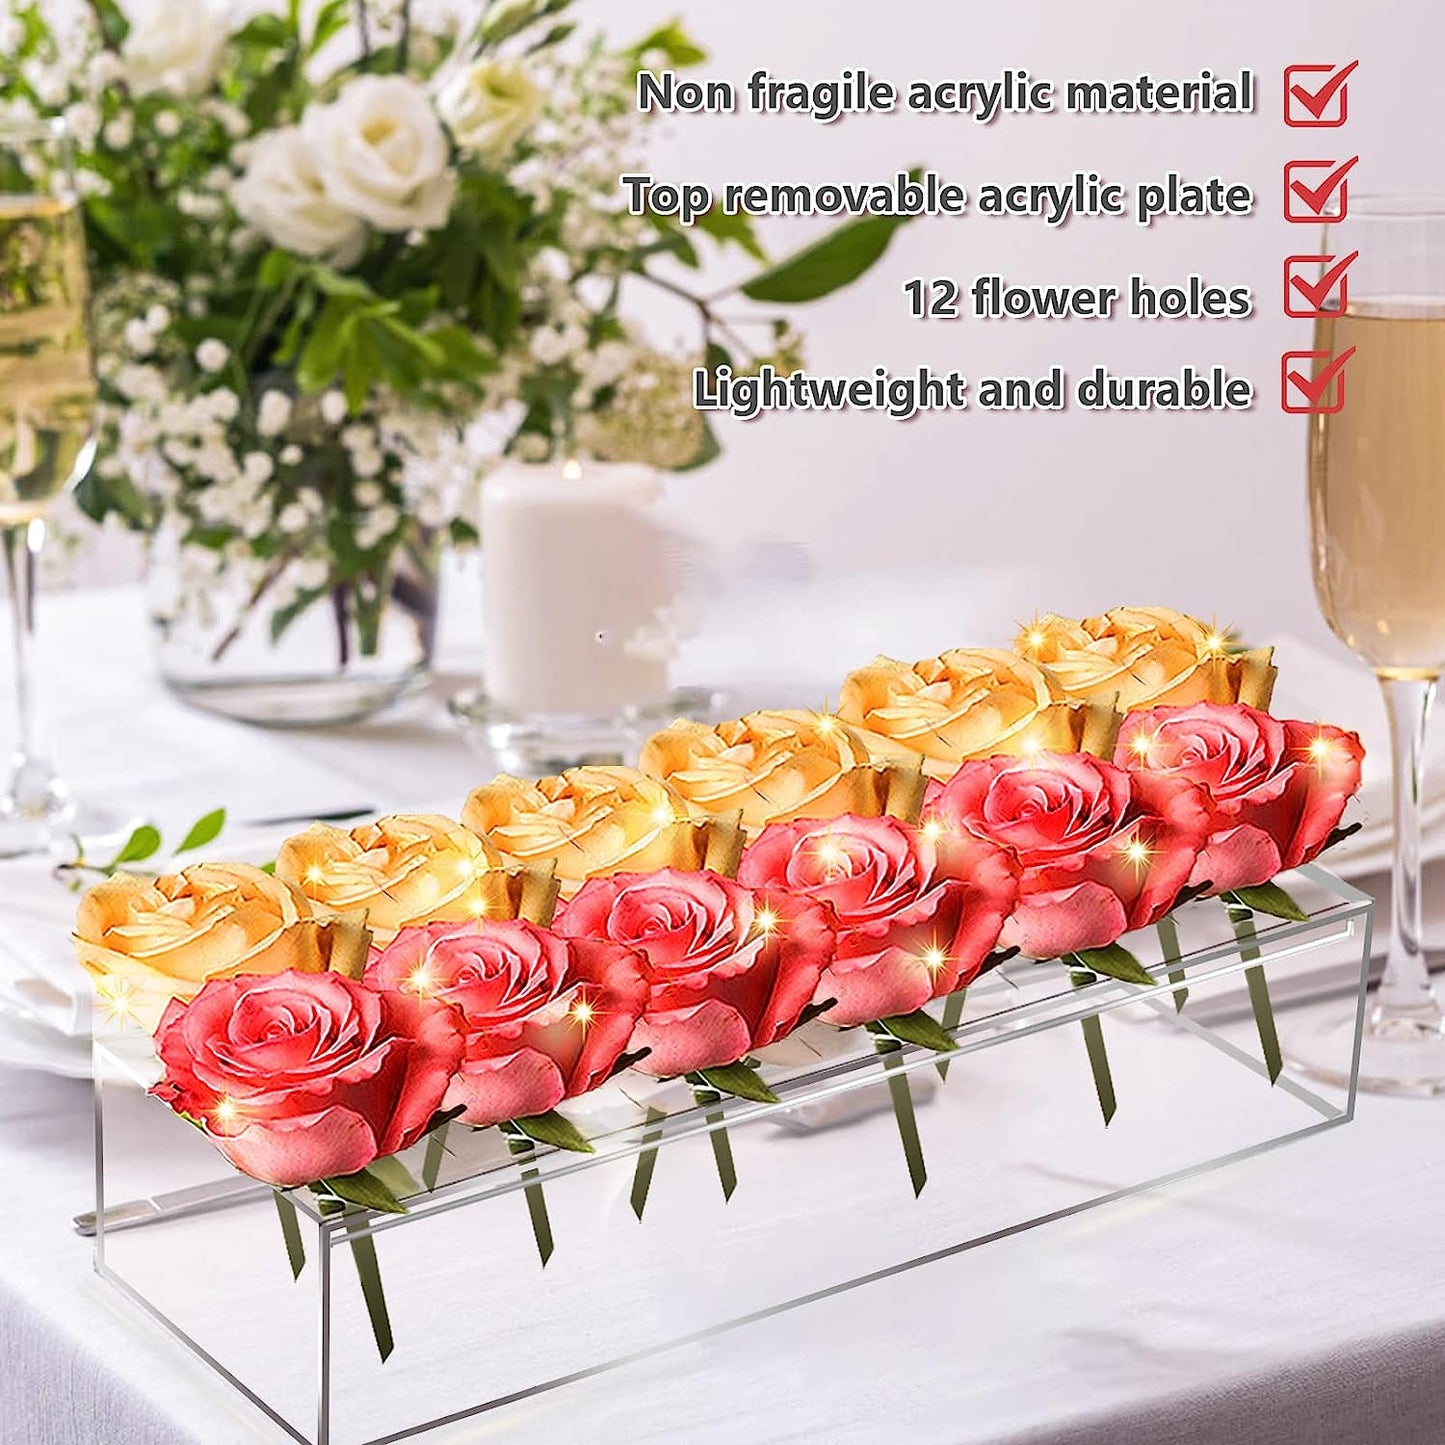 🔥BIG SALE - 50% OFF🔥Clear Acrylic Flower Vase💓 (Buy 3 Free Shipping)